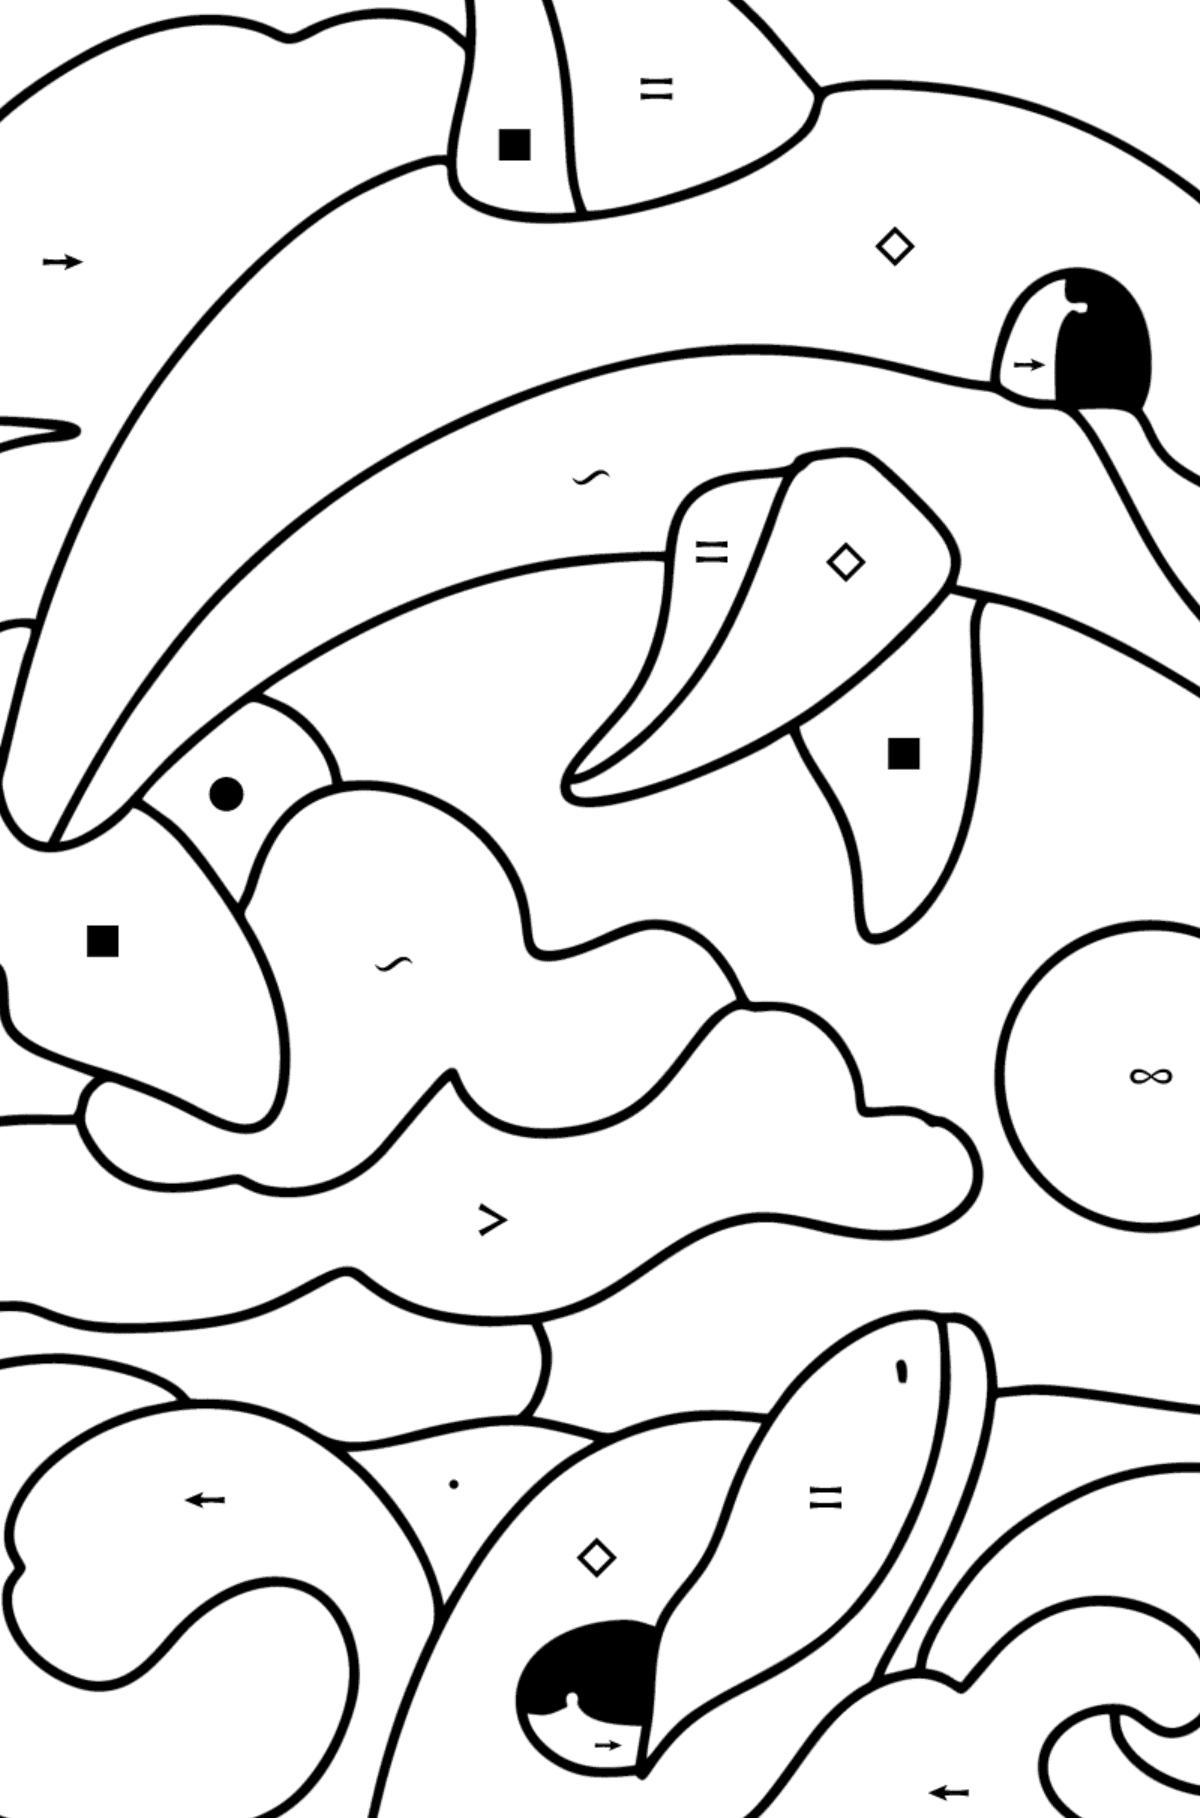 Dolphins coloring page - Coloring by Symbols for Kids